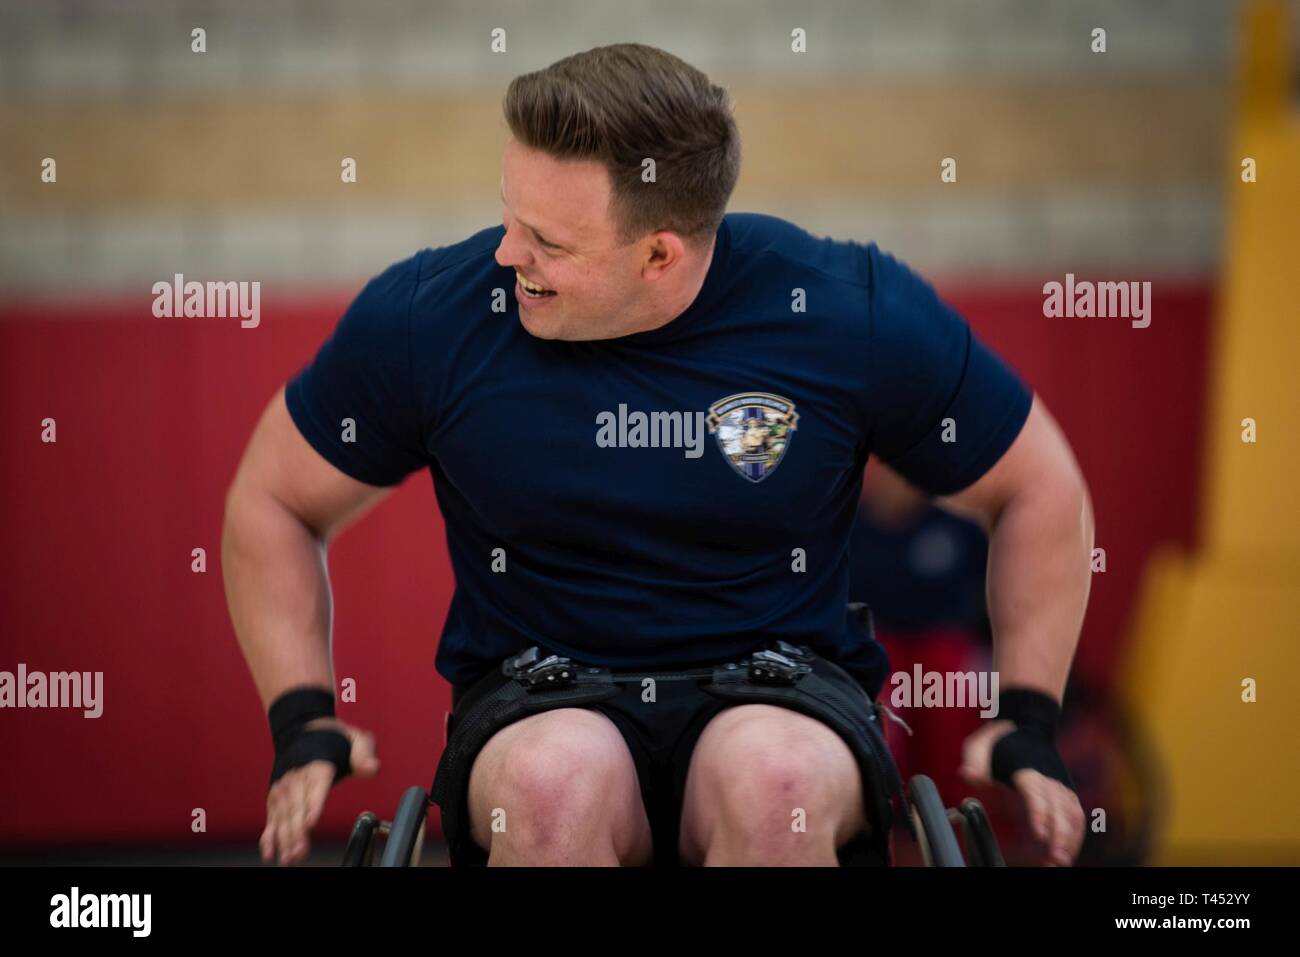 U.S. Marine Corps Gunnery Sgt. Steve McKay participates in a drill at wheelchair basketball practice during the 2019 Marine Corps Trials at Marine Corps Base Camp Pendleton, California, Feb. 27. The Marine Corps Trials promotes rehabilitation through adaptive sports participation and serves as the primary venue to select Marine Corps participants for the DoD Warrior Games. (Official U.S. Marine Corps Stock Photo